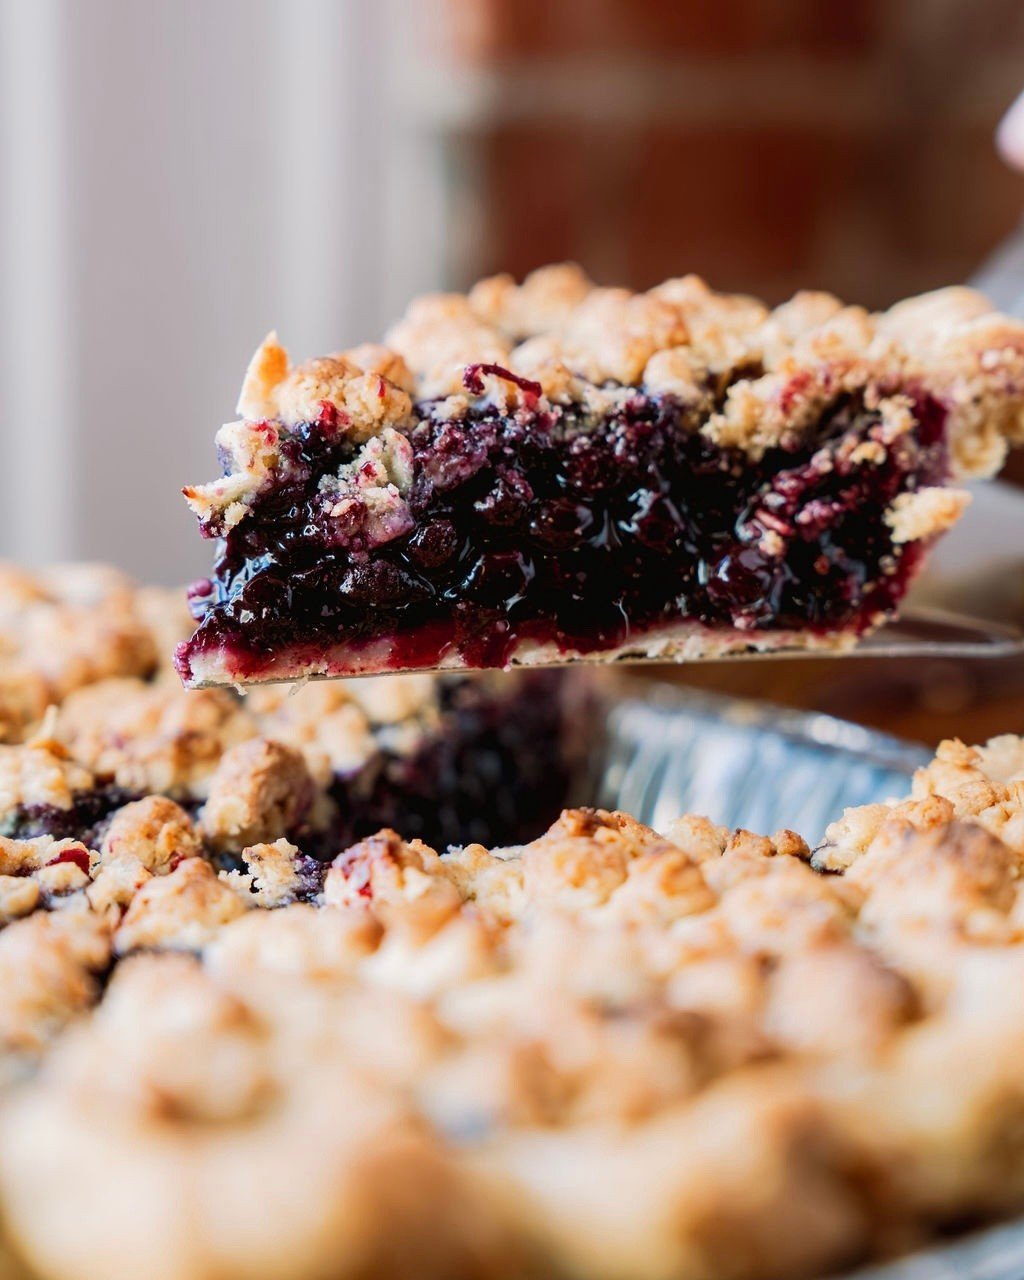 Sunday is National Blueberry Pie Day and we&rsquo;re celebrating all weekend by bringing wild blueberry pie back onto the menu for the weekend! Come in and get a slice of this juicy pie for a limited time!